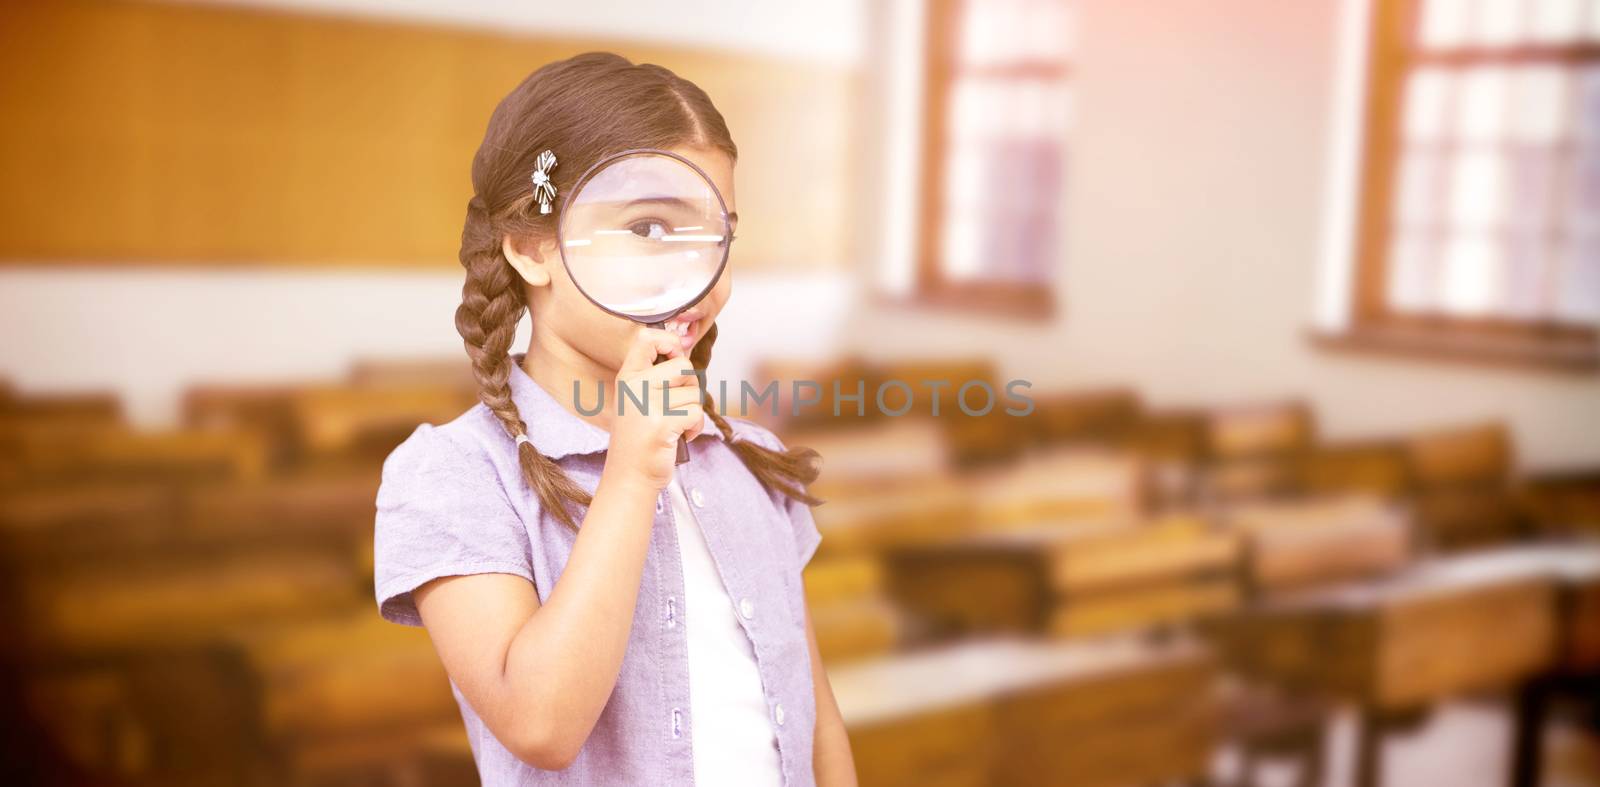 Composite image of pupil looking through magnifying glass by Wavebreakmedia